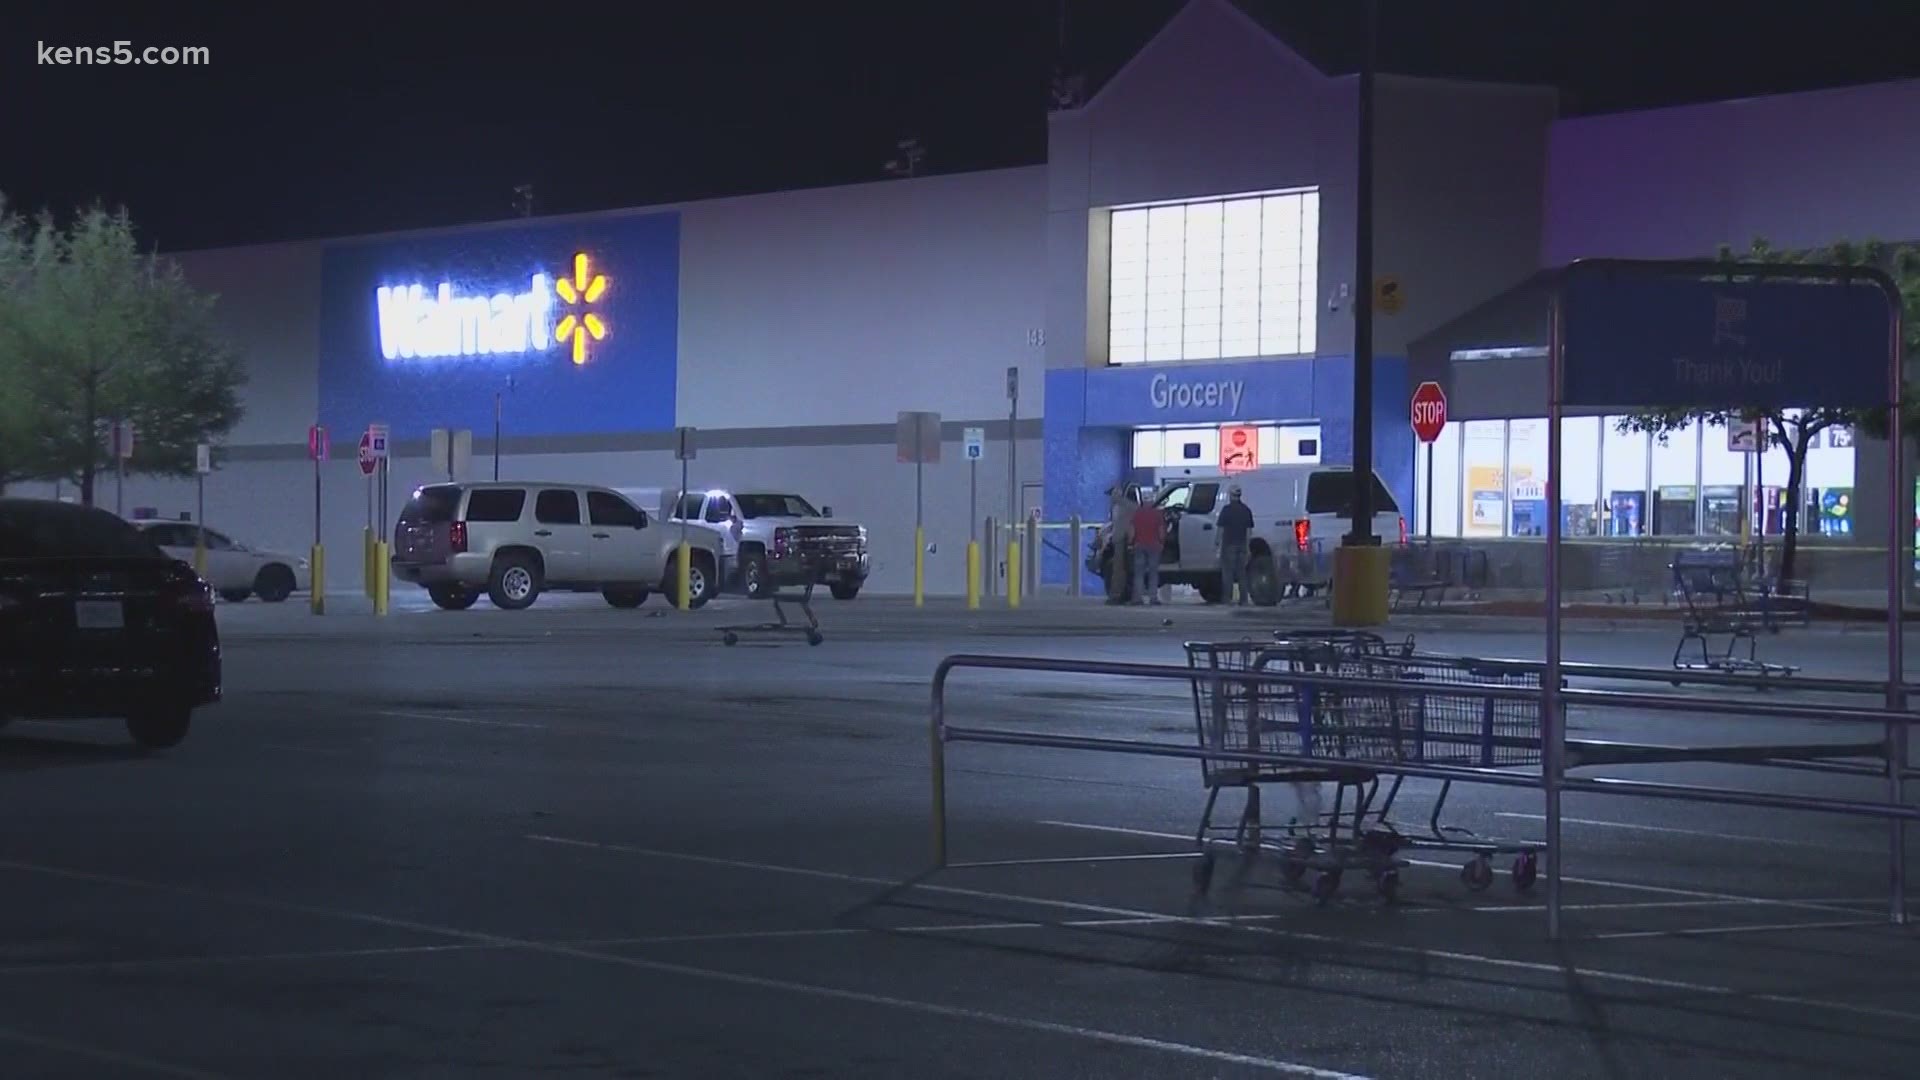 San Antonio Police were called to the Walmart on Austin Highway at Harry Wurzbach at 7:27 p.m. for a call involving a "threat - bomb with device."